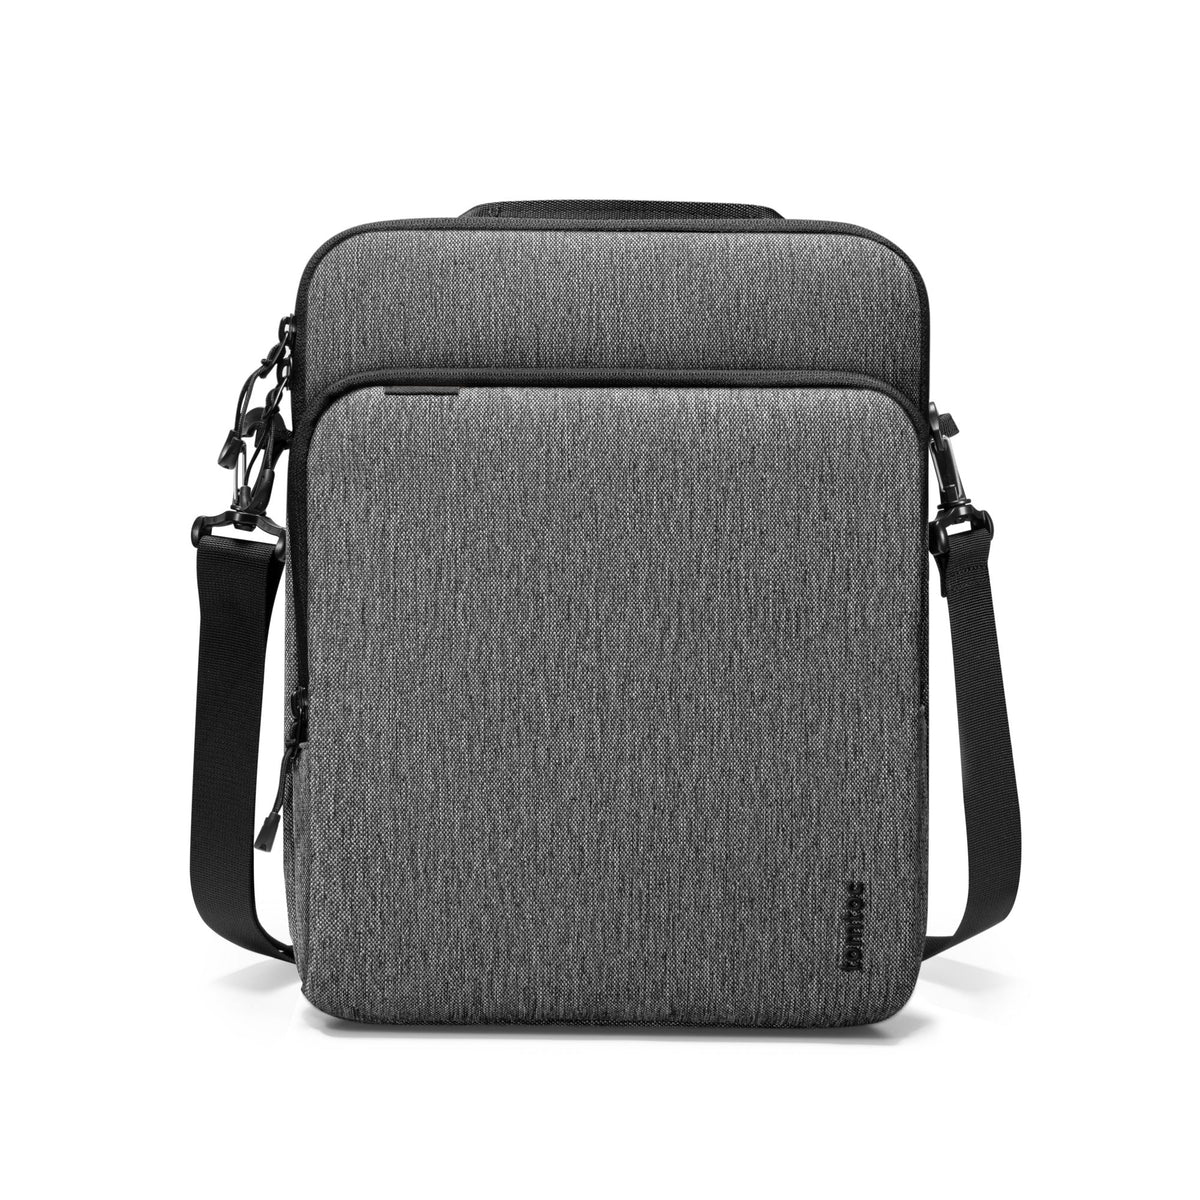 primary_DefenderACE-B03 Tablet Shoulder Bag For 12.9'' iPad Pro | Gray